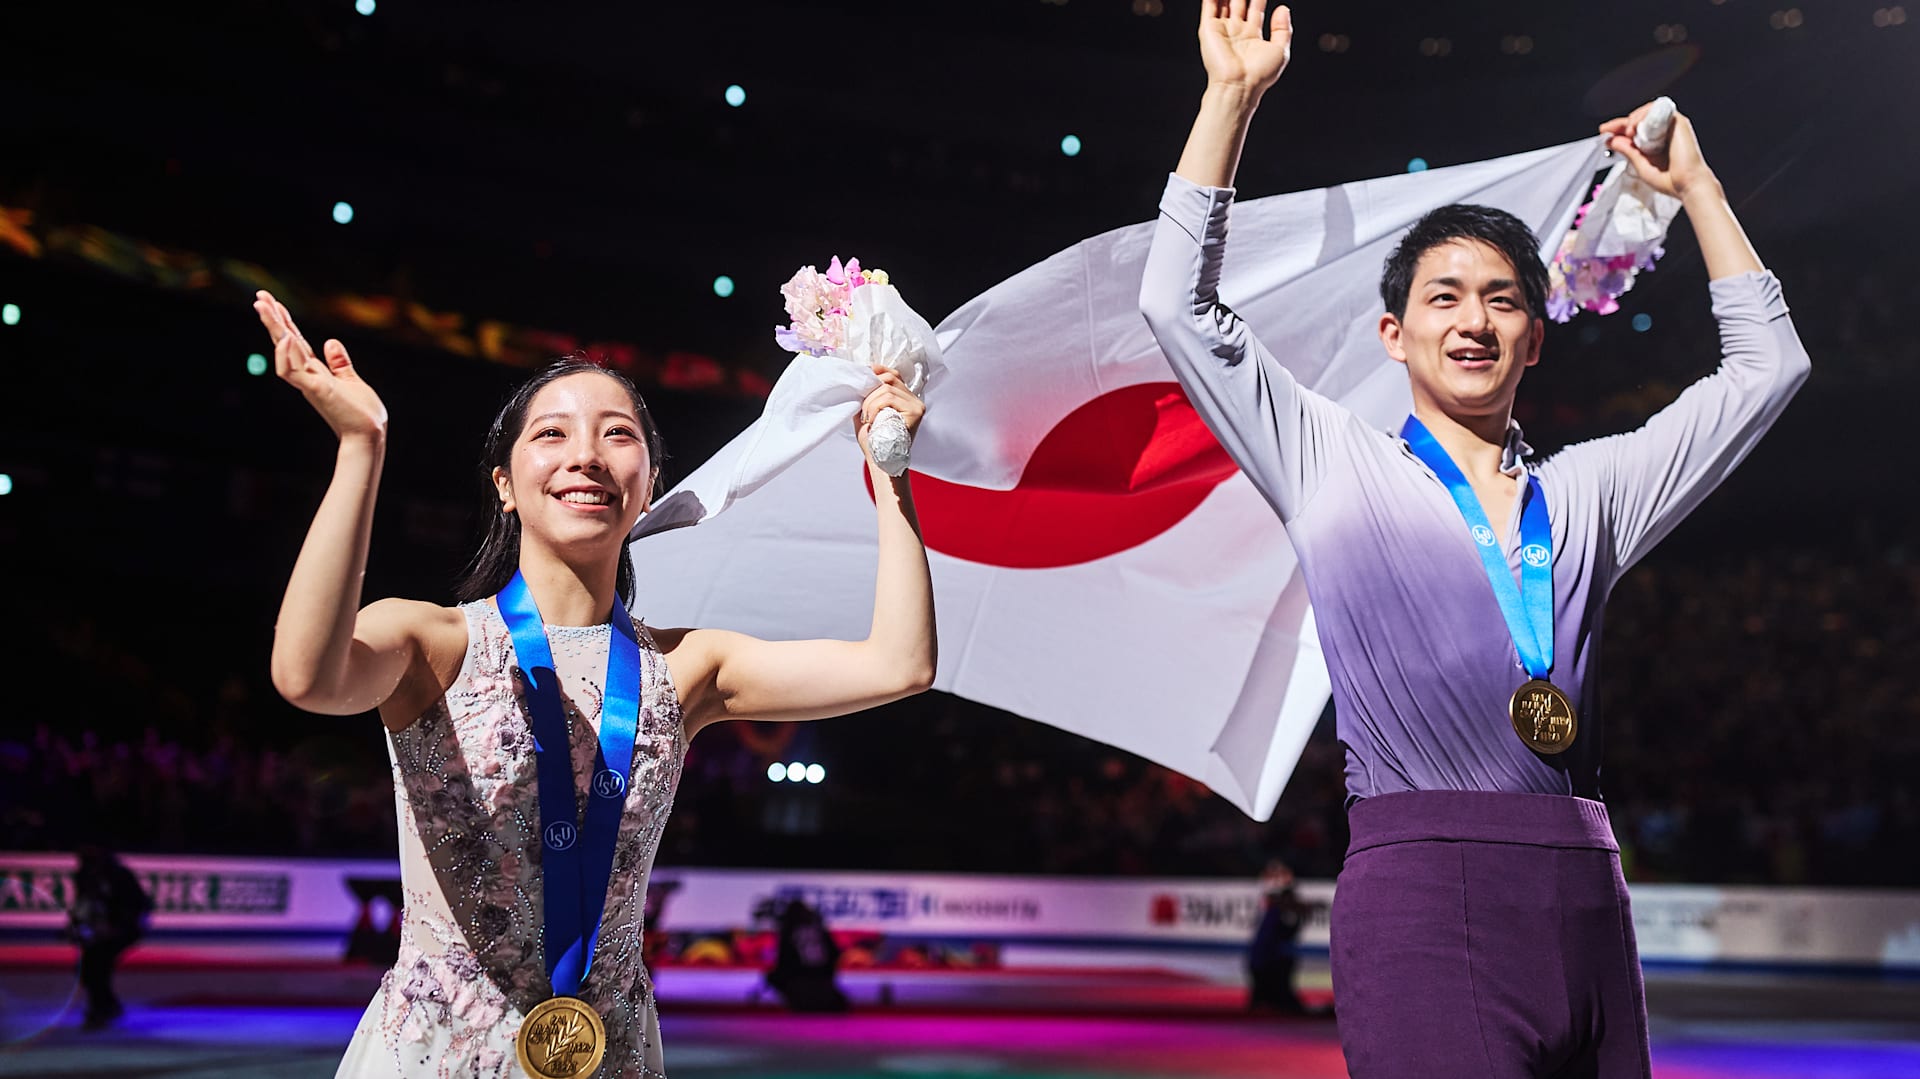 ISU World Team Trophy 2023 Preview, full schedule, and how to watch live action of competition from Japan